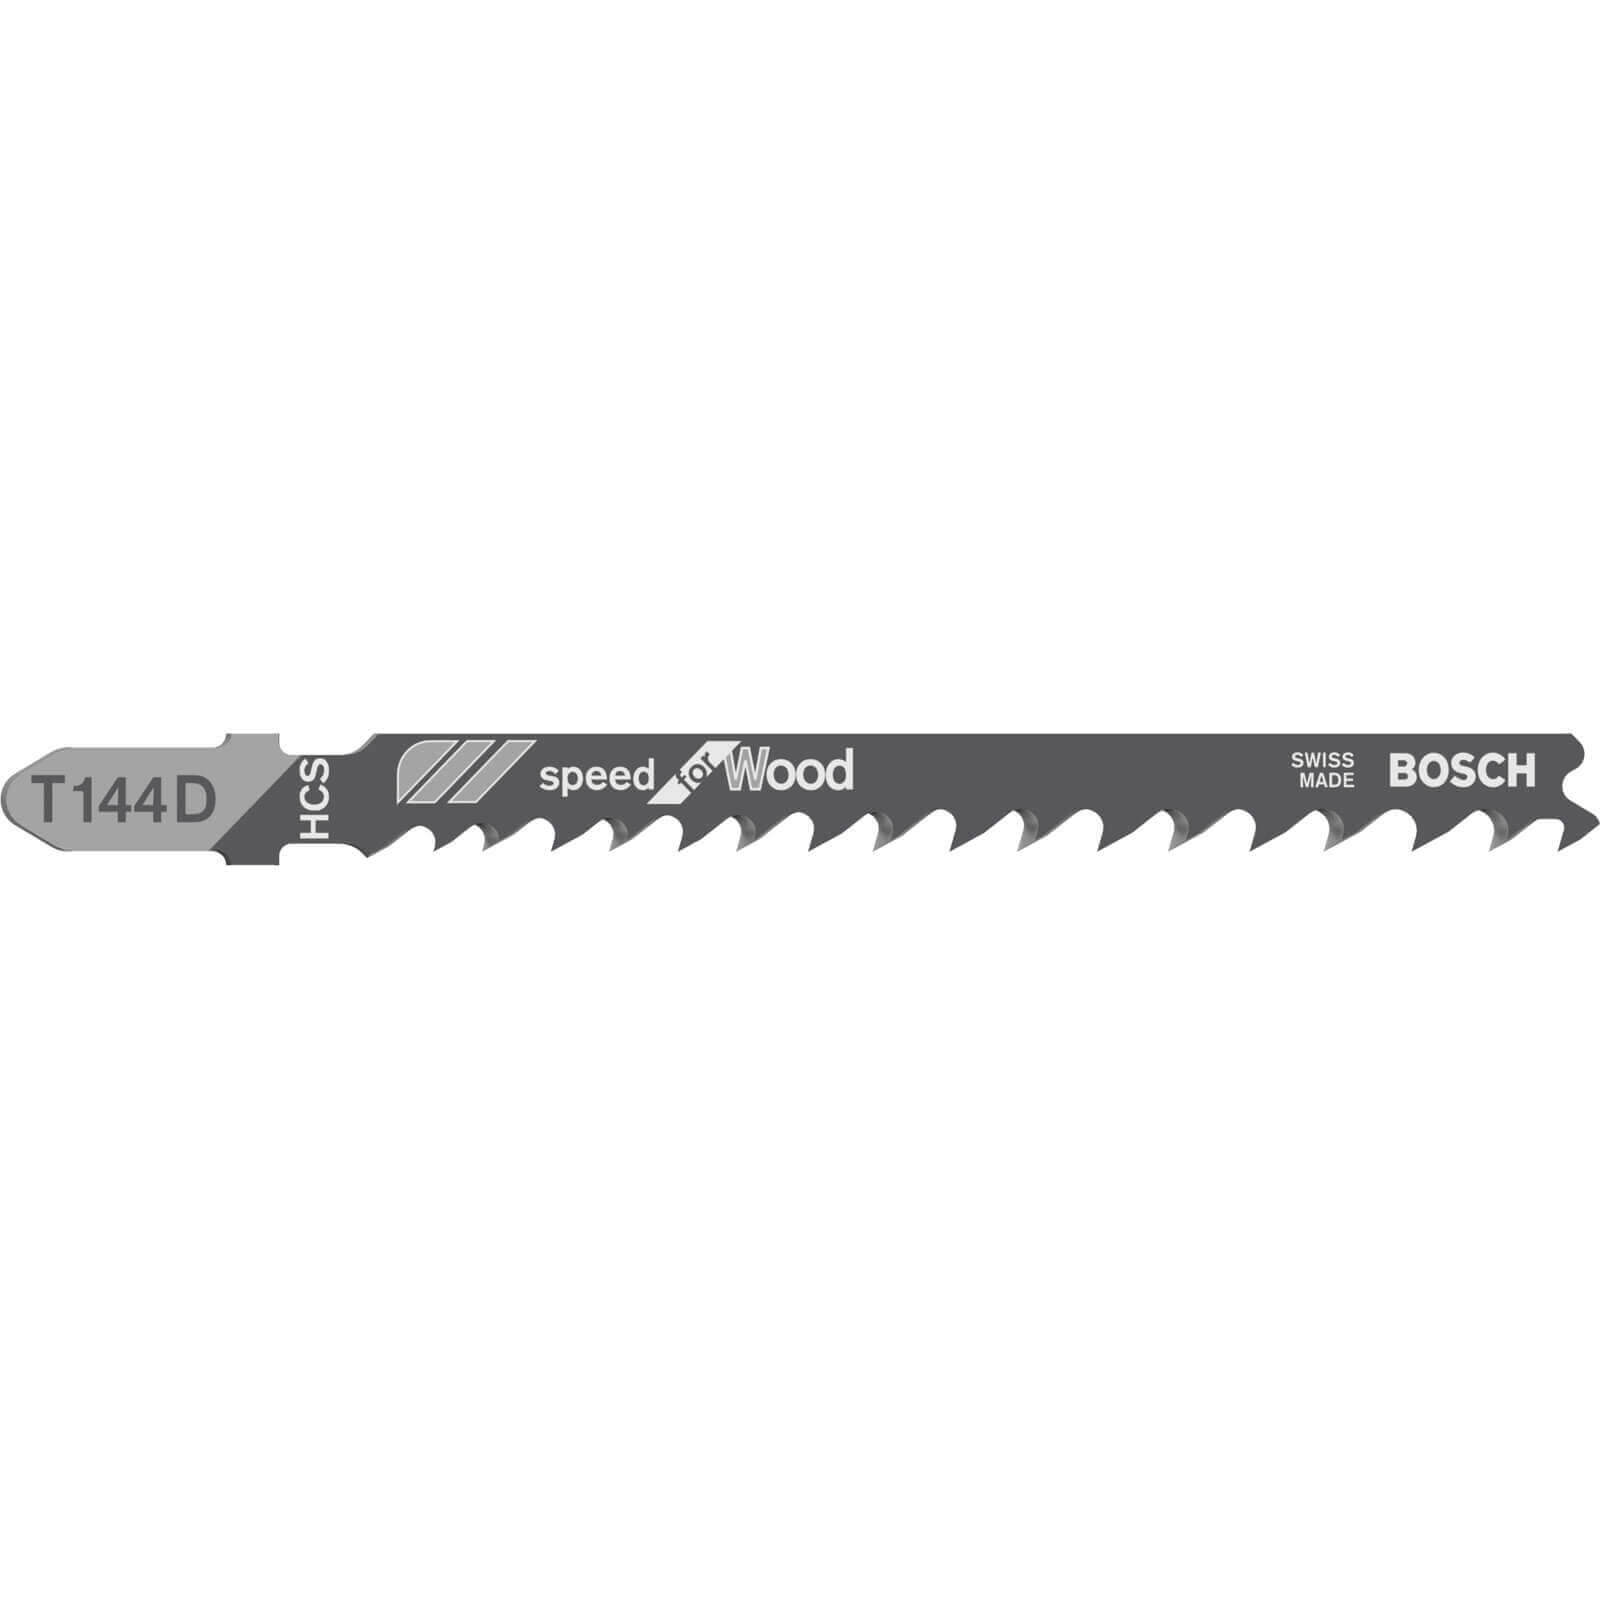 Image of Bosch T144 D Wood Cutting Jigsaw Blades Pack of 5